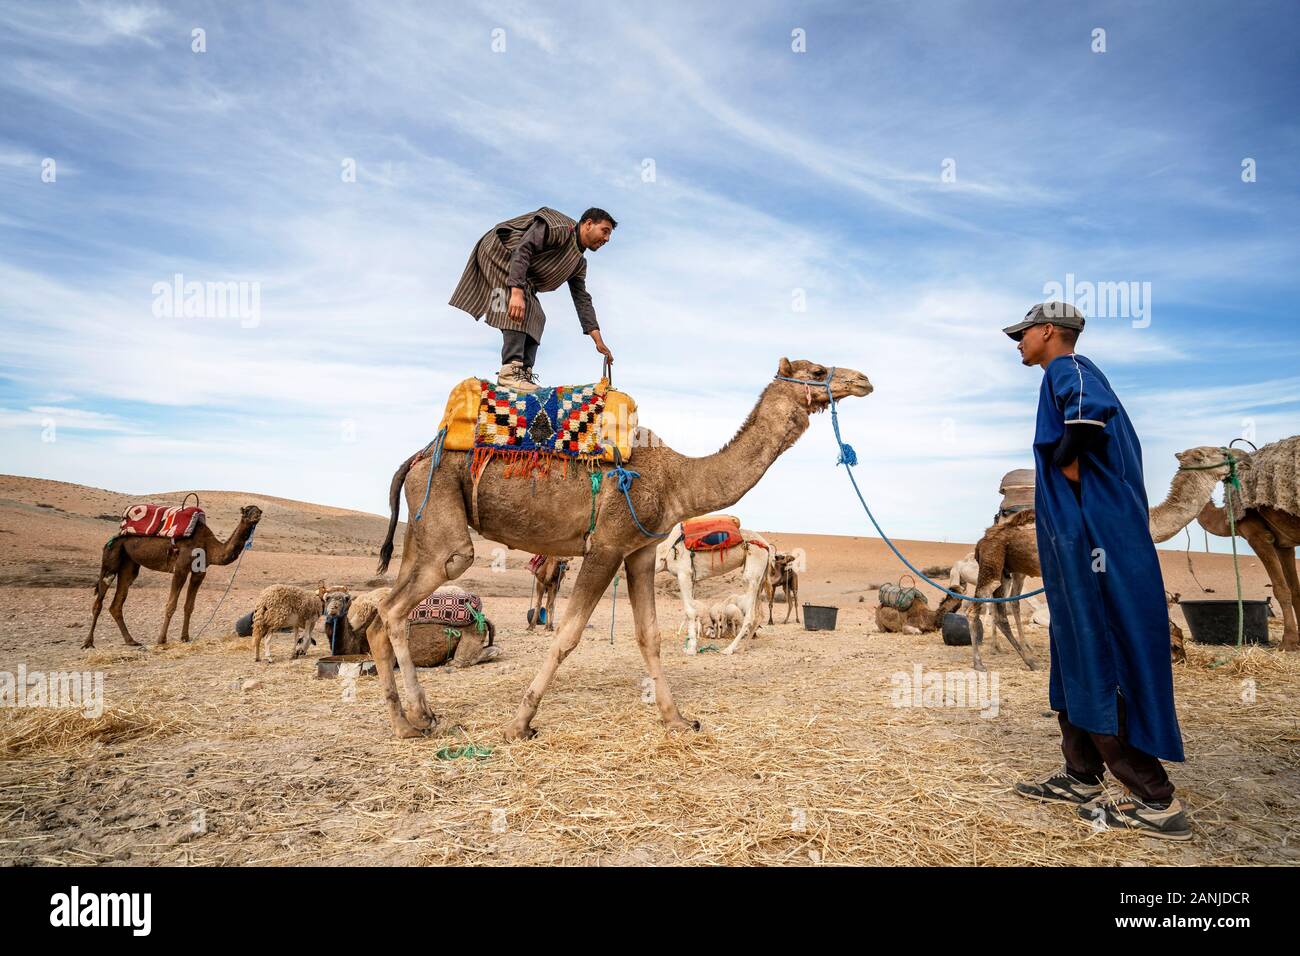 Marrakech, Morocco - January 14, 2010: A man standing on his dromedary camel to show off on Agafay desert , Marrakech, Morocco Stock Photo